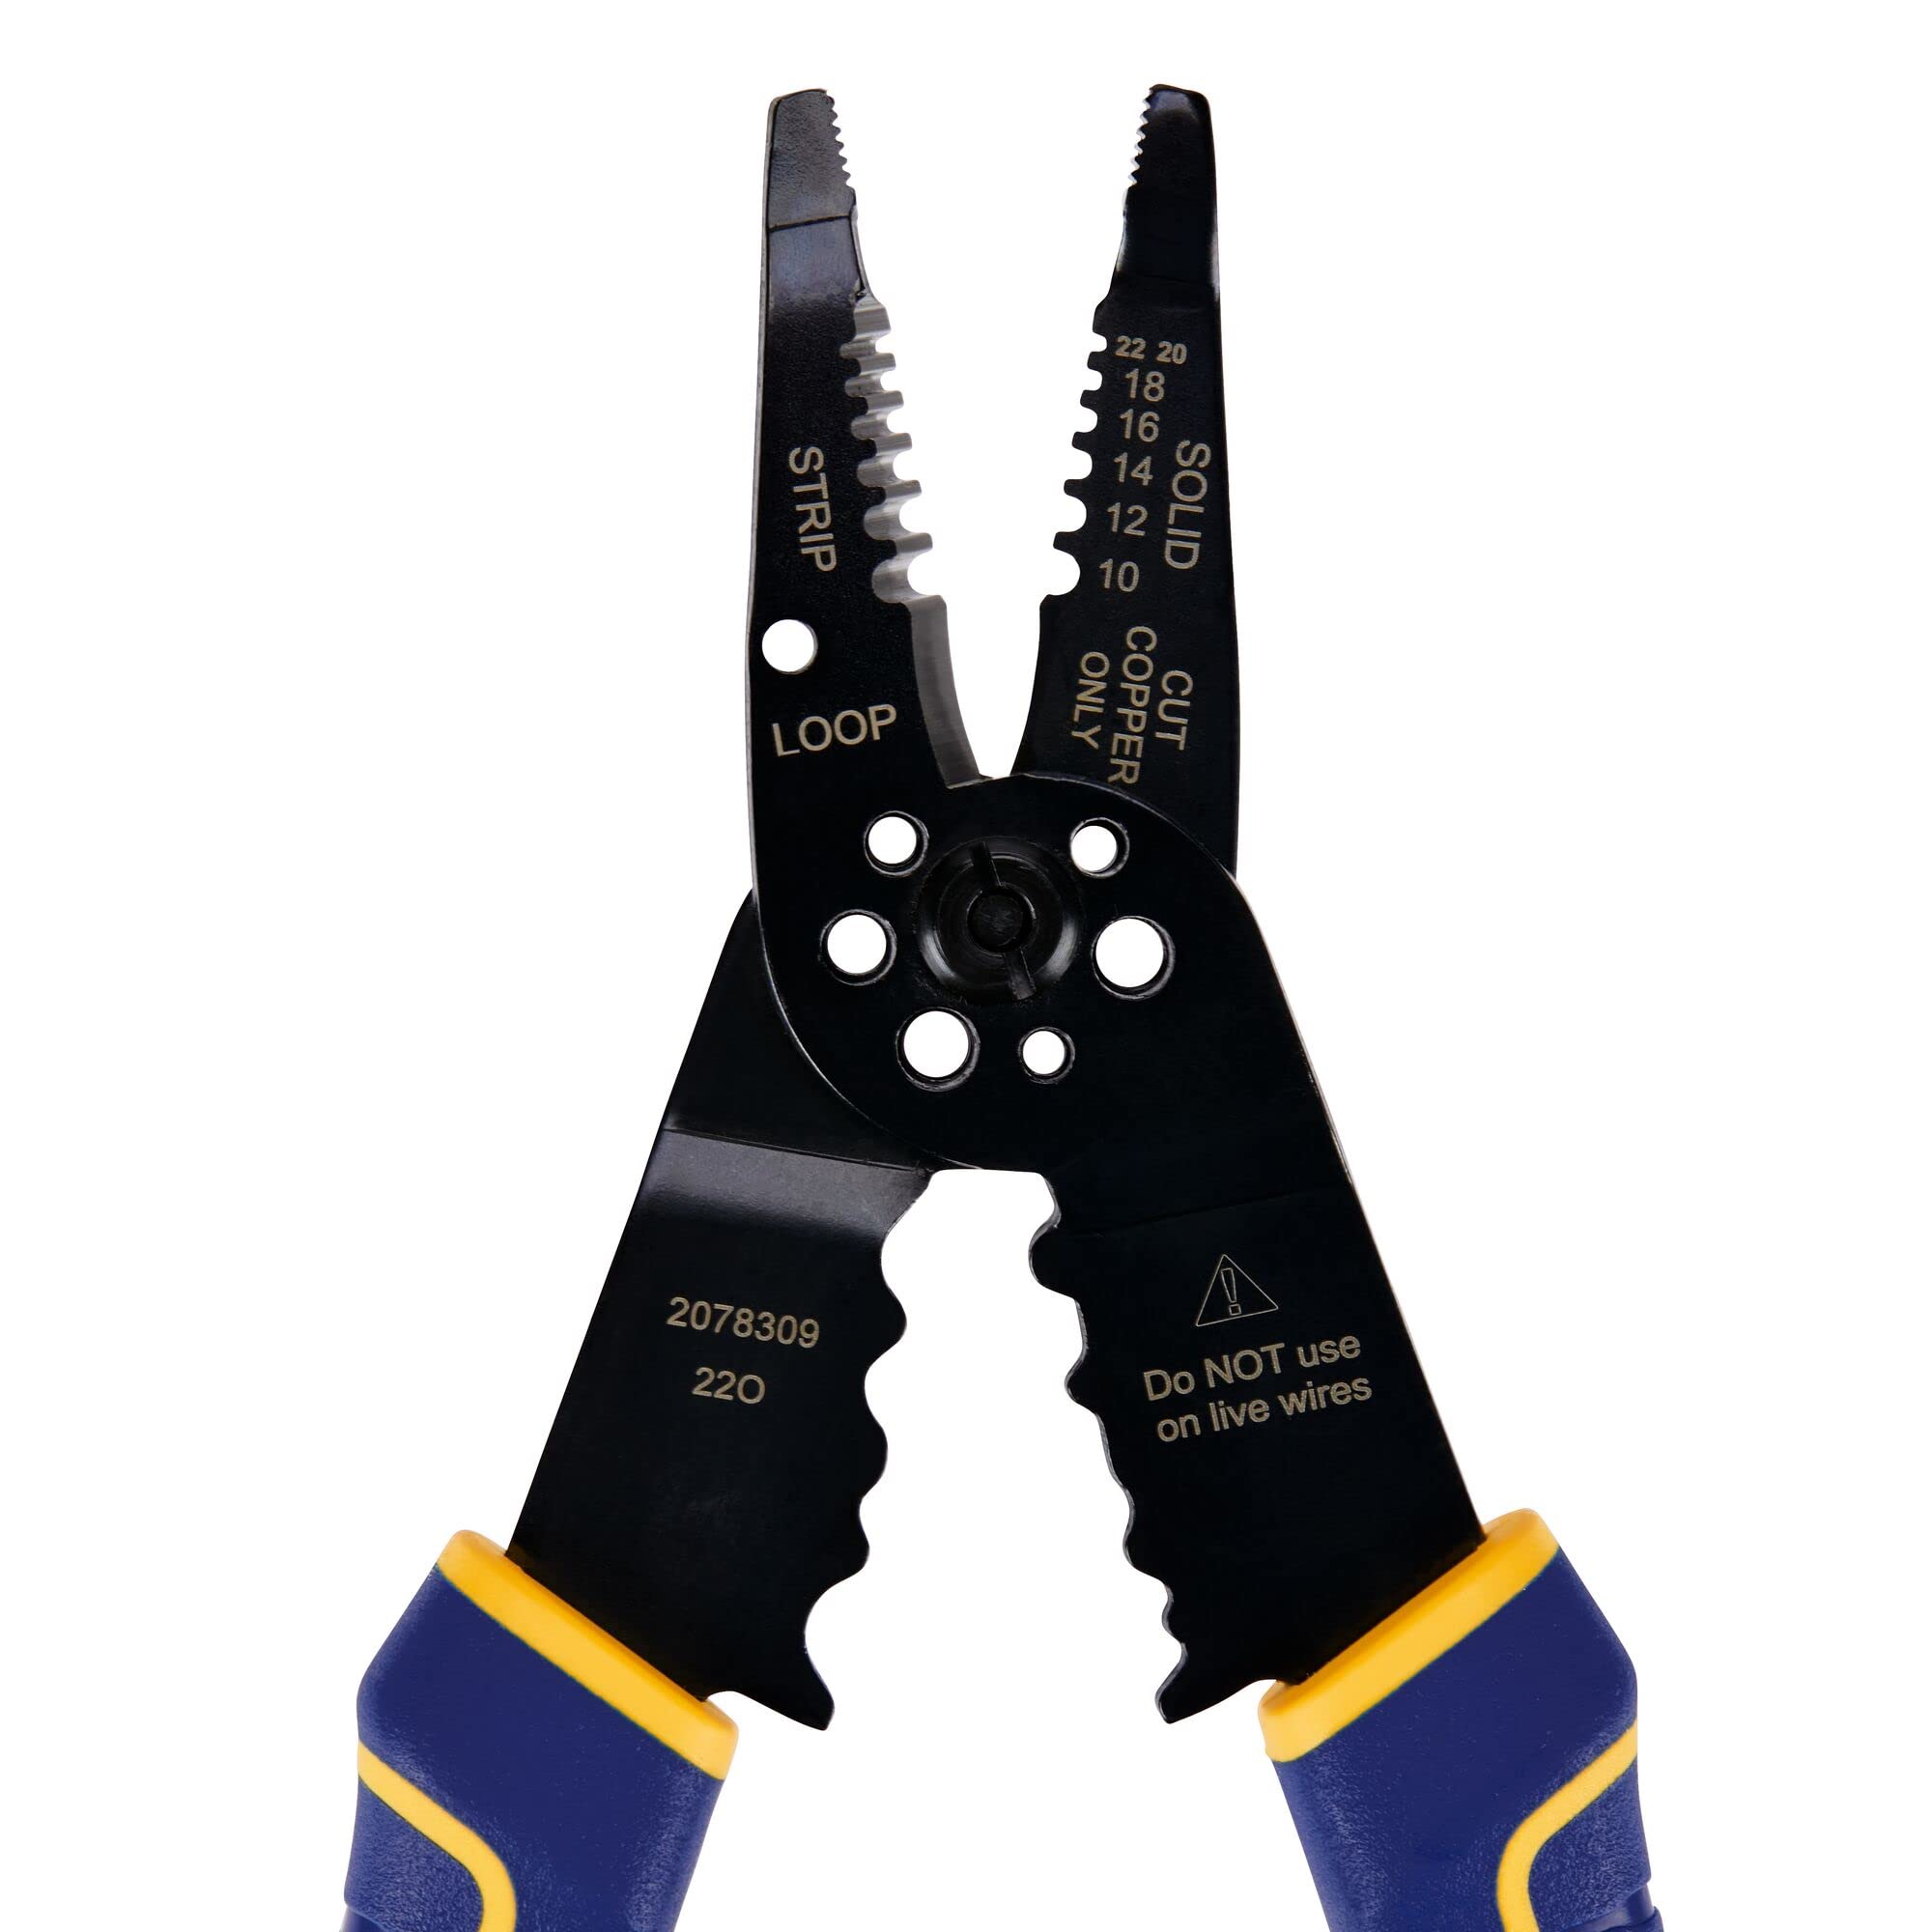 IRWIN VISE-GRIP Wire Stripper, 8 inch, Cuts 10-22 AWG, Plier Style Nose, ProTouch Grip for Maximum Comfort (2078309)